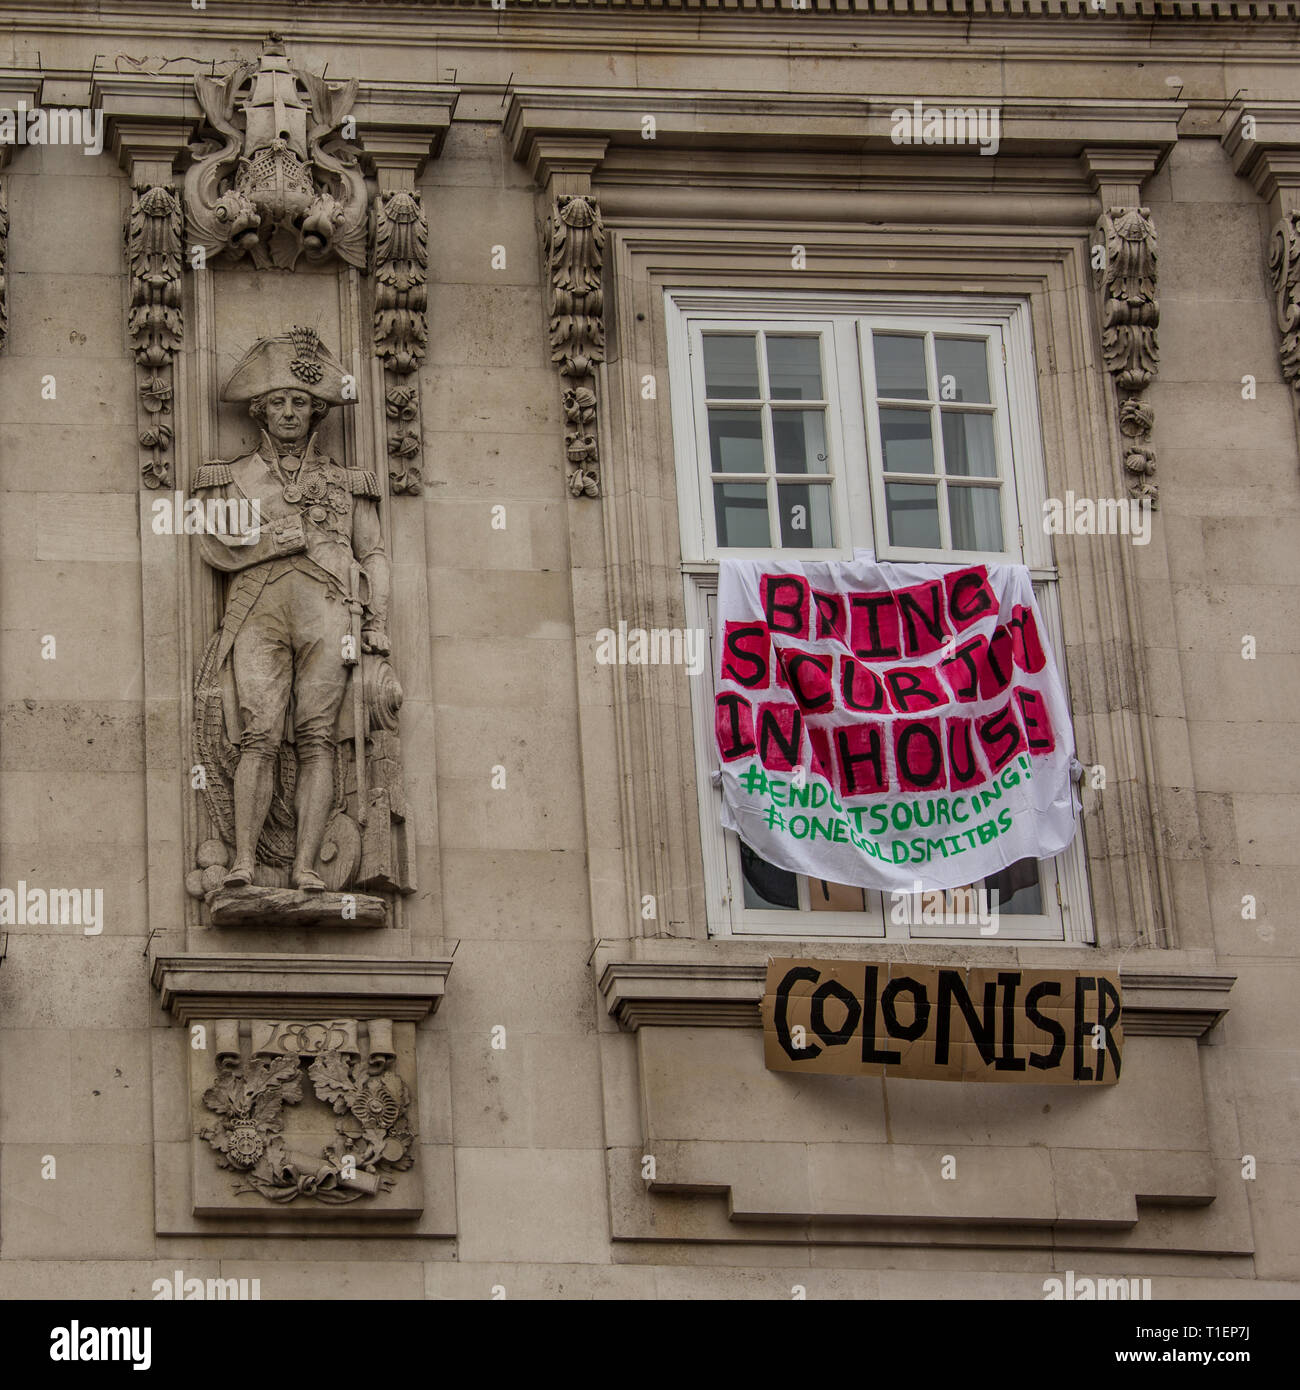 London, UK. 26 March, 2019. Protesters from Goldsmiths Anti-Rascist Action are occupying the building after a candidate in student elections was subjected to racist abuse, the group are demanding that Goldsmiths, part of the University of London, do more to tackle racism on the campus. David Rowe/Alamy Live News. Stock Photo